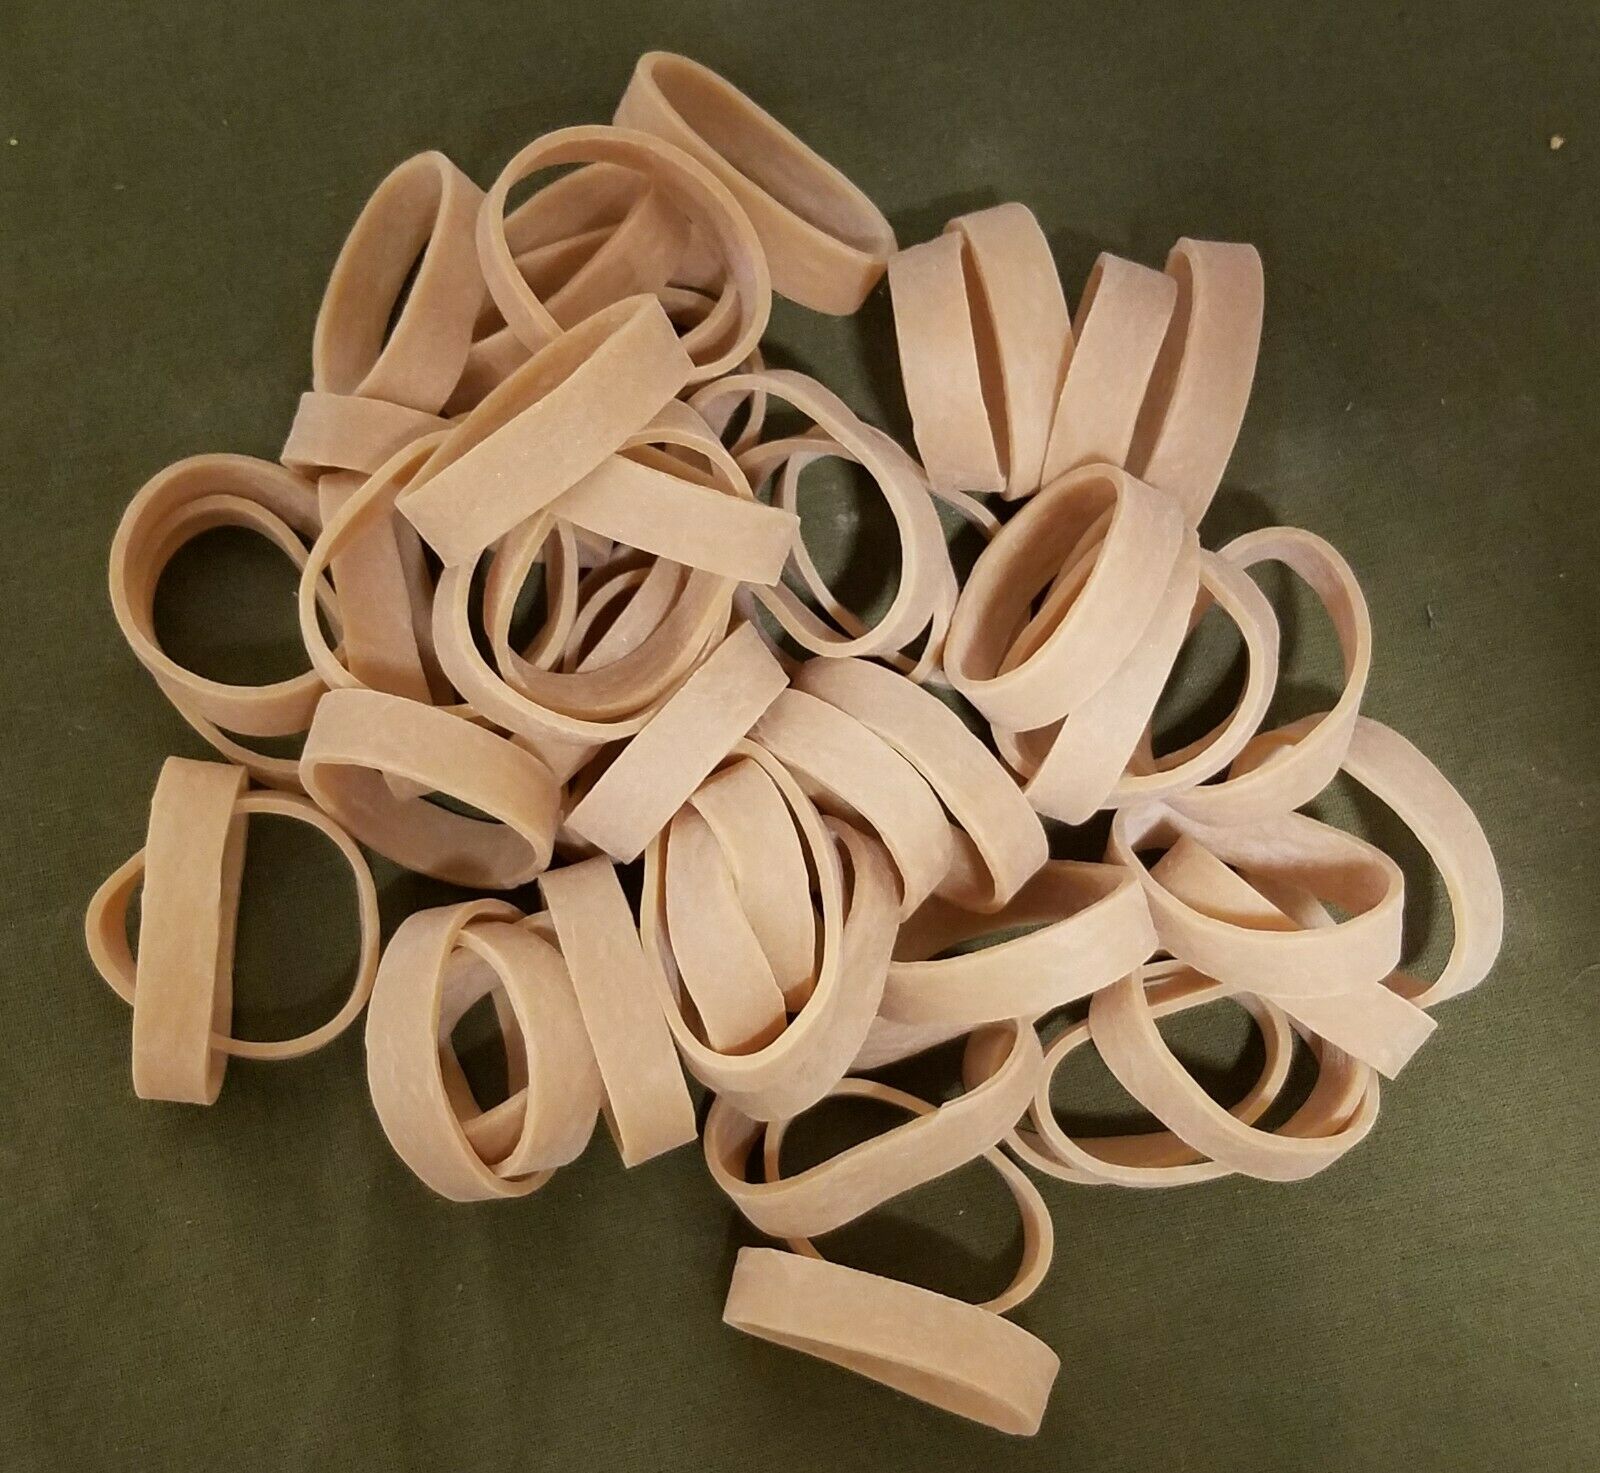 Parachute Rubber Bands Skydiving Rigging (100 Bands) Approx. 5oz